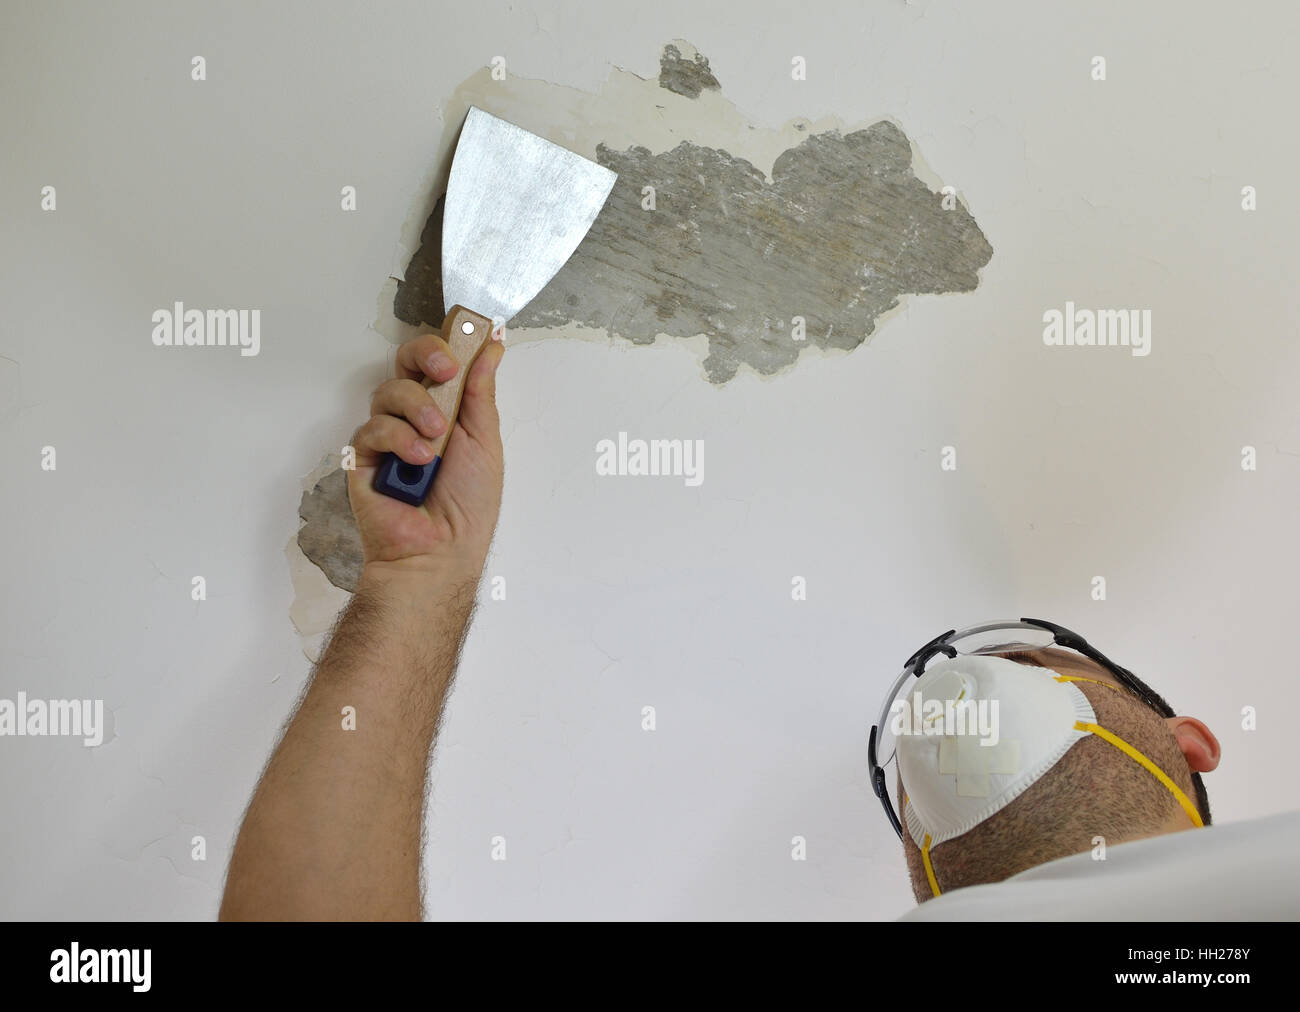 Man Scraping A Ceiling With A Plaster Spatula Preparing It